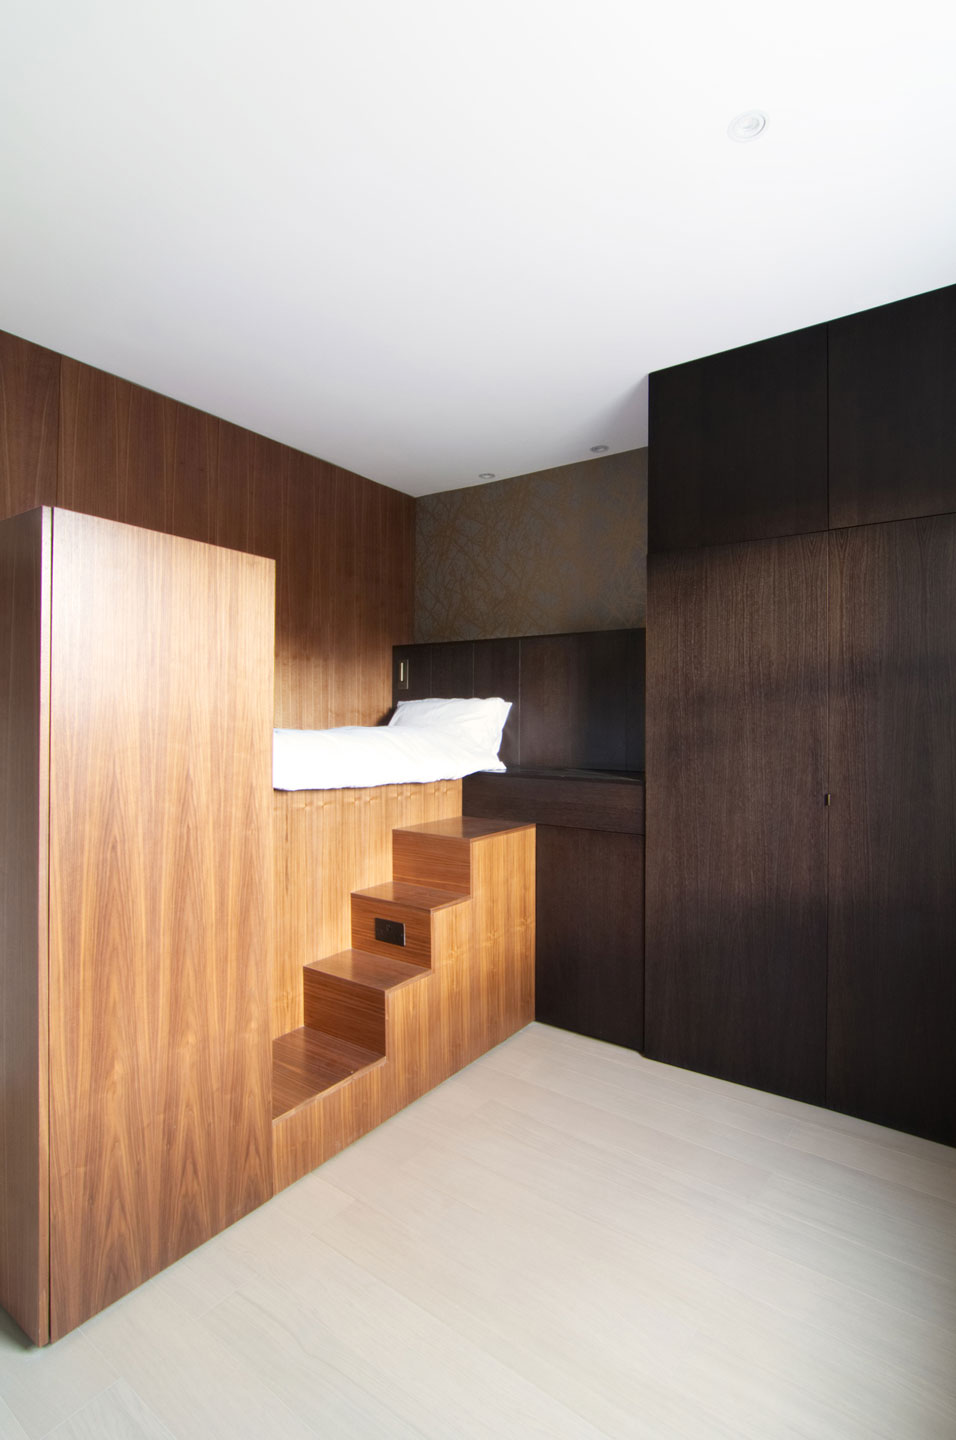 Each of the 18 sqm small apartments has a smart layout that depends on custom wooden structure